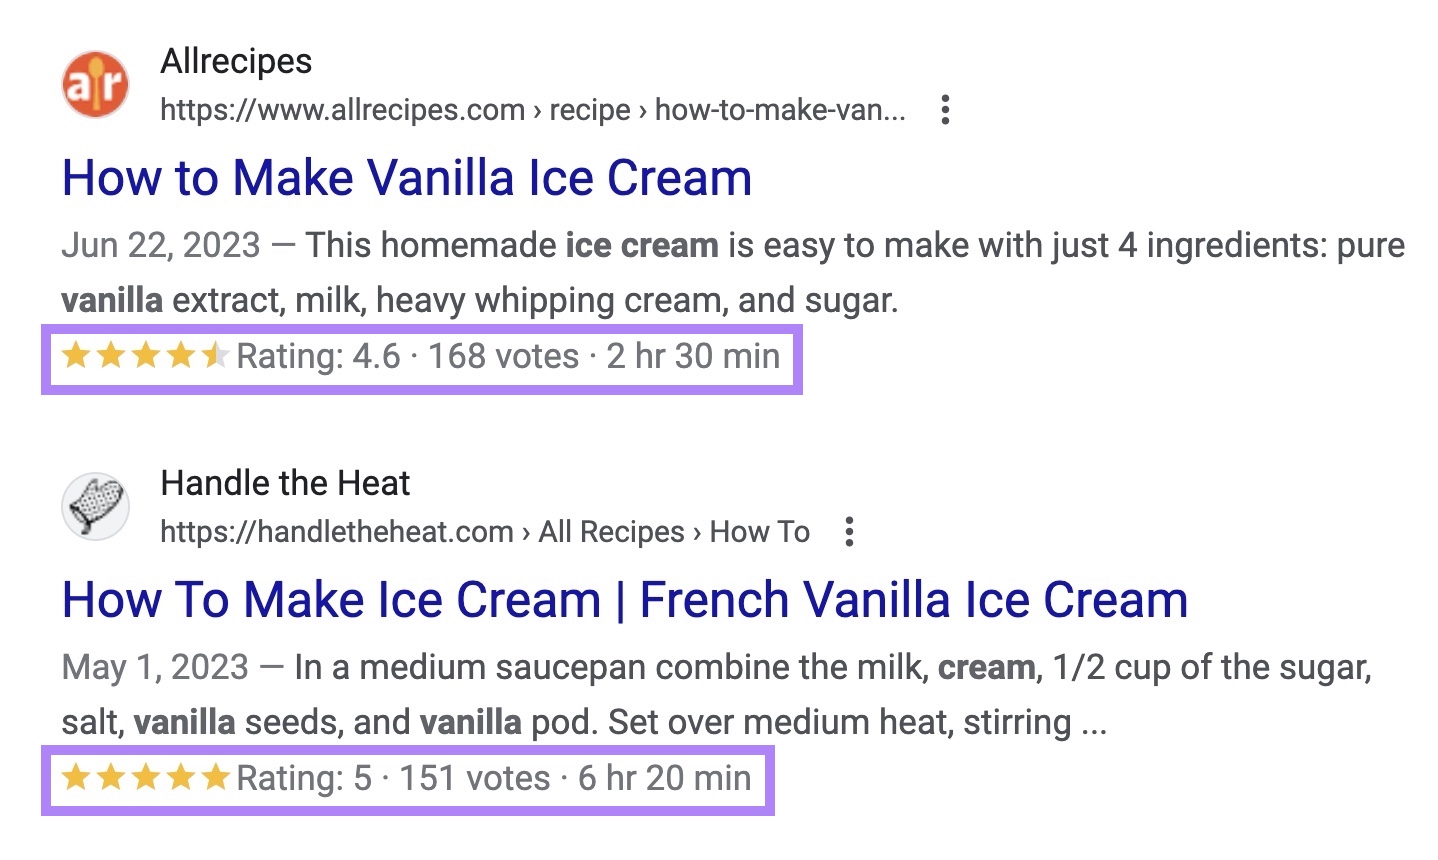 Rich results connected  SERP showing recipes with prima  ratings, the fig   of idiosyncratic    votes, and an estimation  of the clip  it takes to marque   the recipe